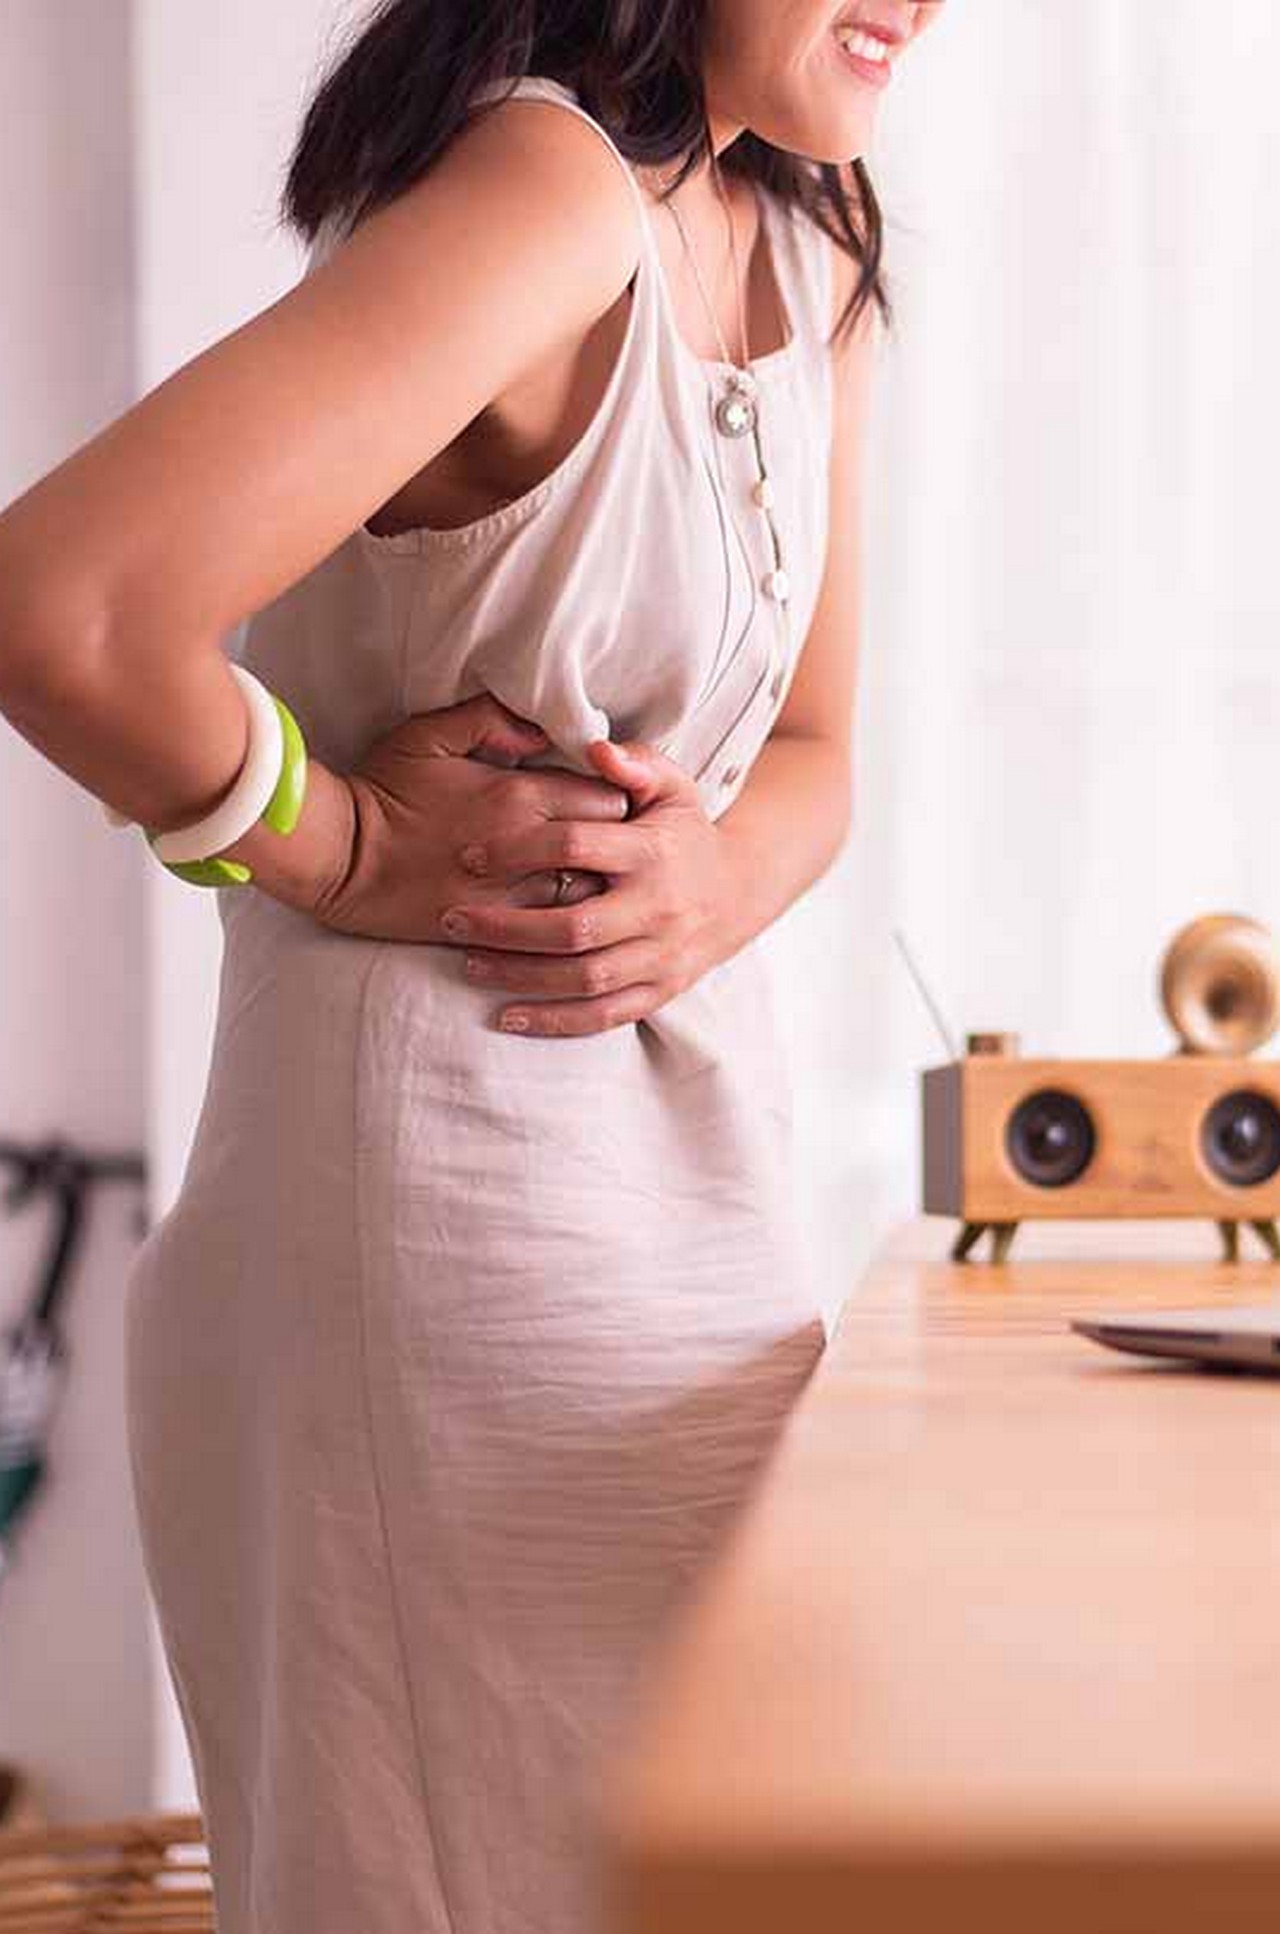  Home Remedies For Pancreatitis: How To Support Your Recovery At Home